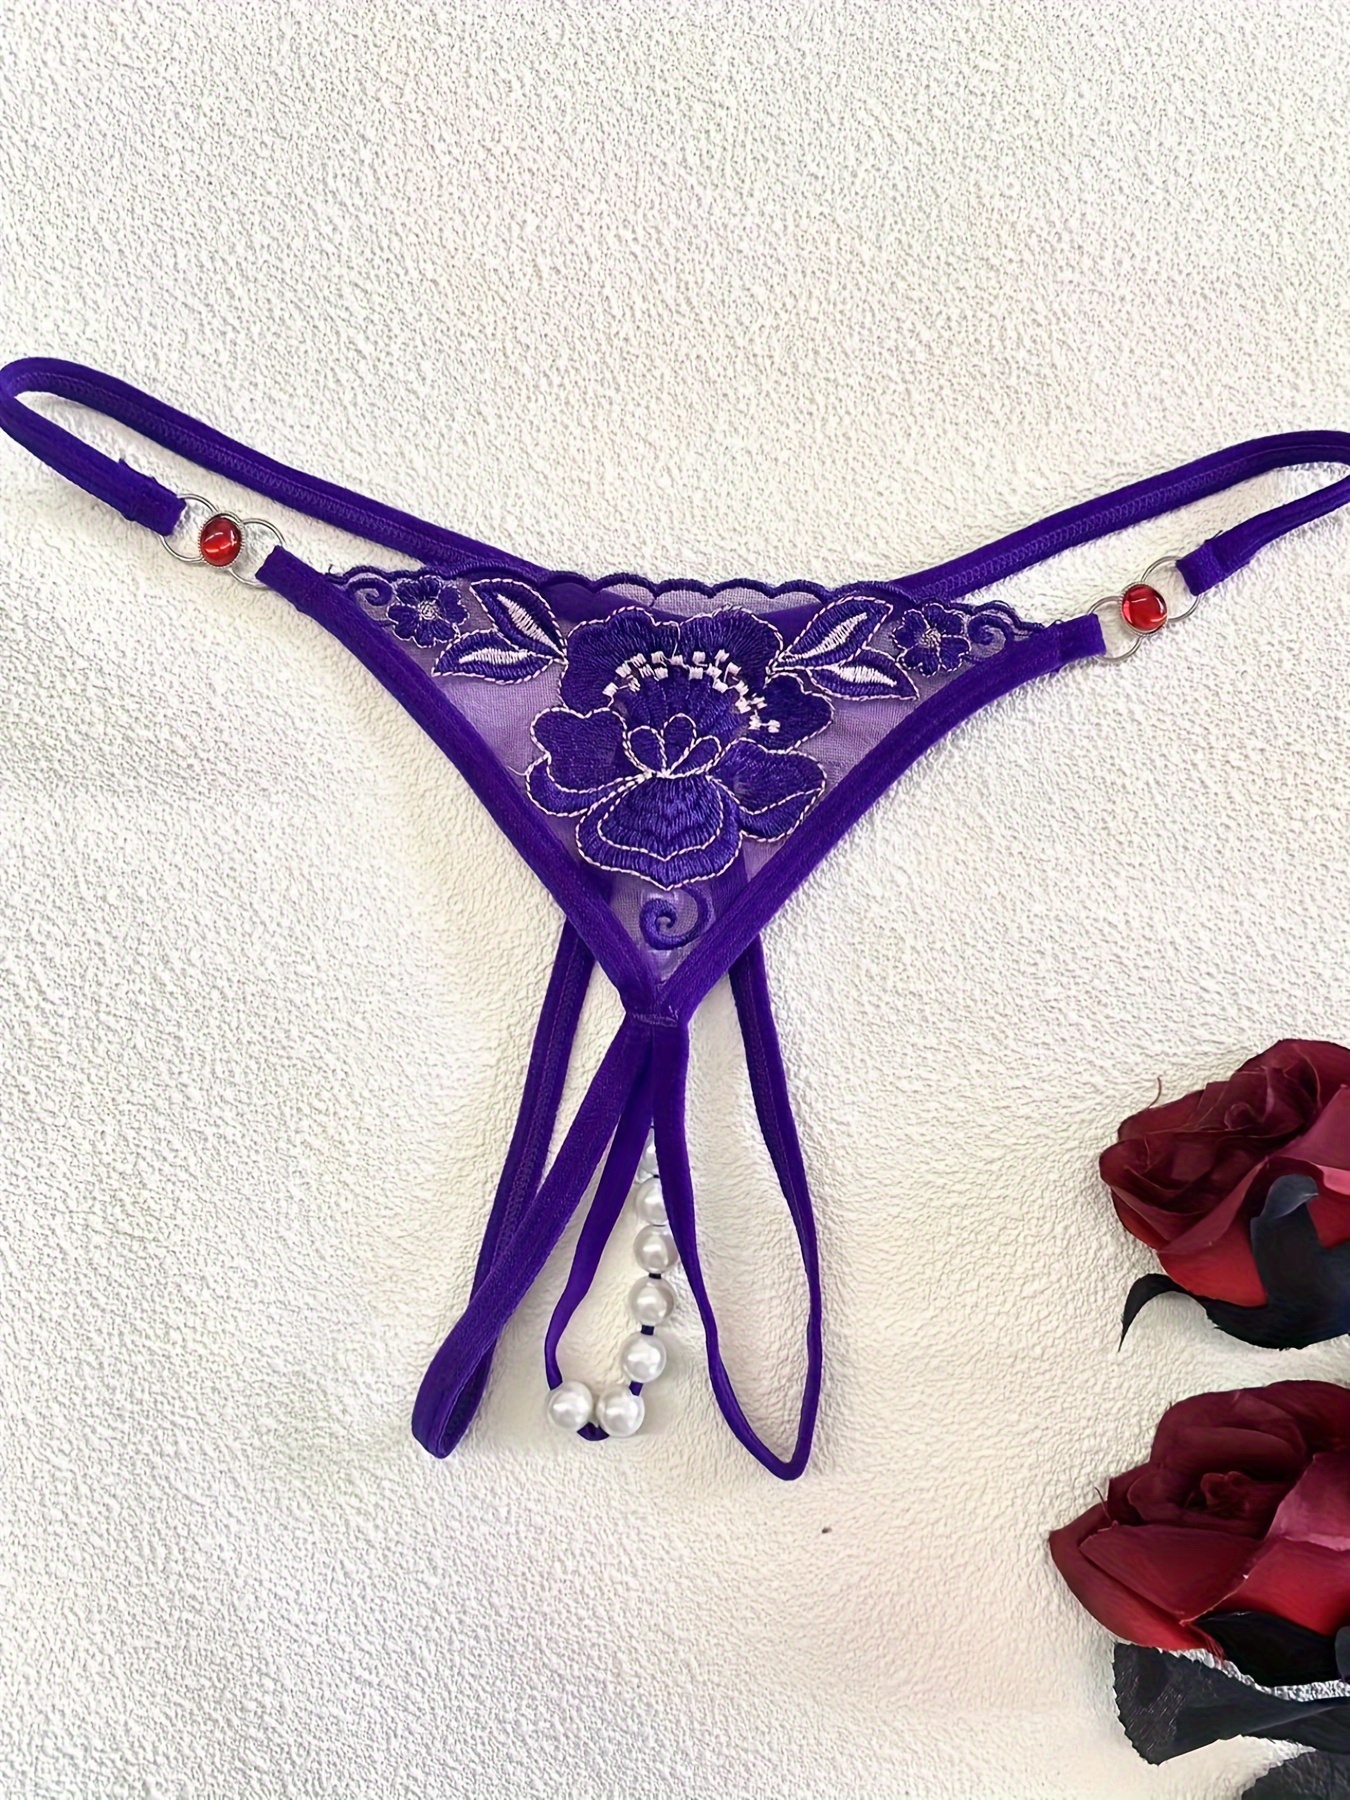 Embroidered Flower Pearl Massage Crotchless Briefs Sexy Lingerie For Women  With Open Crotch And Love Heart Design Transparent Underwear J230530 From  Sts_019, $11.4